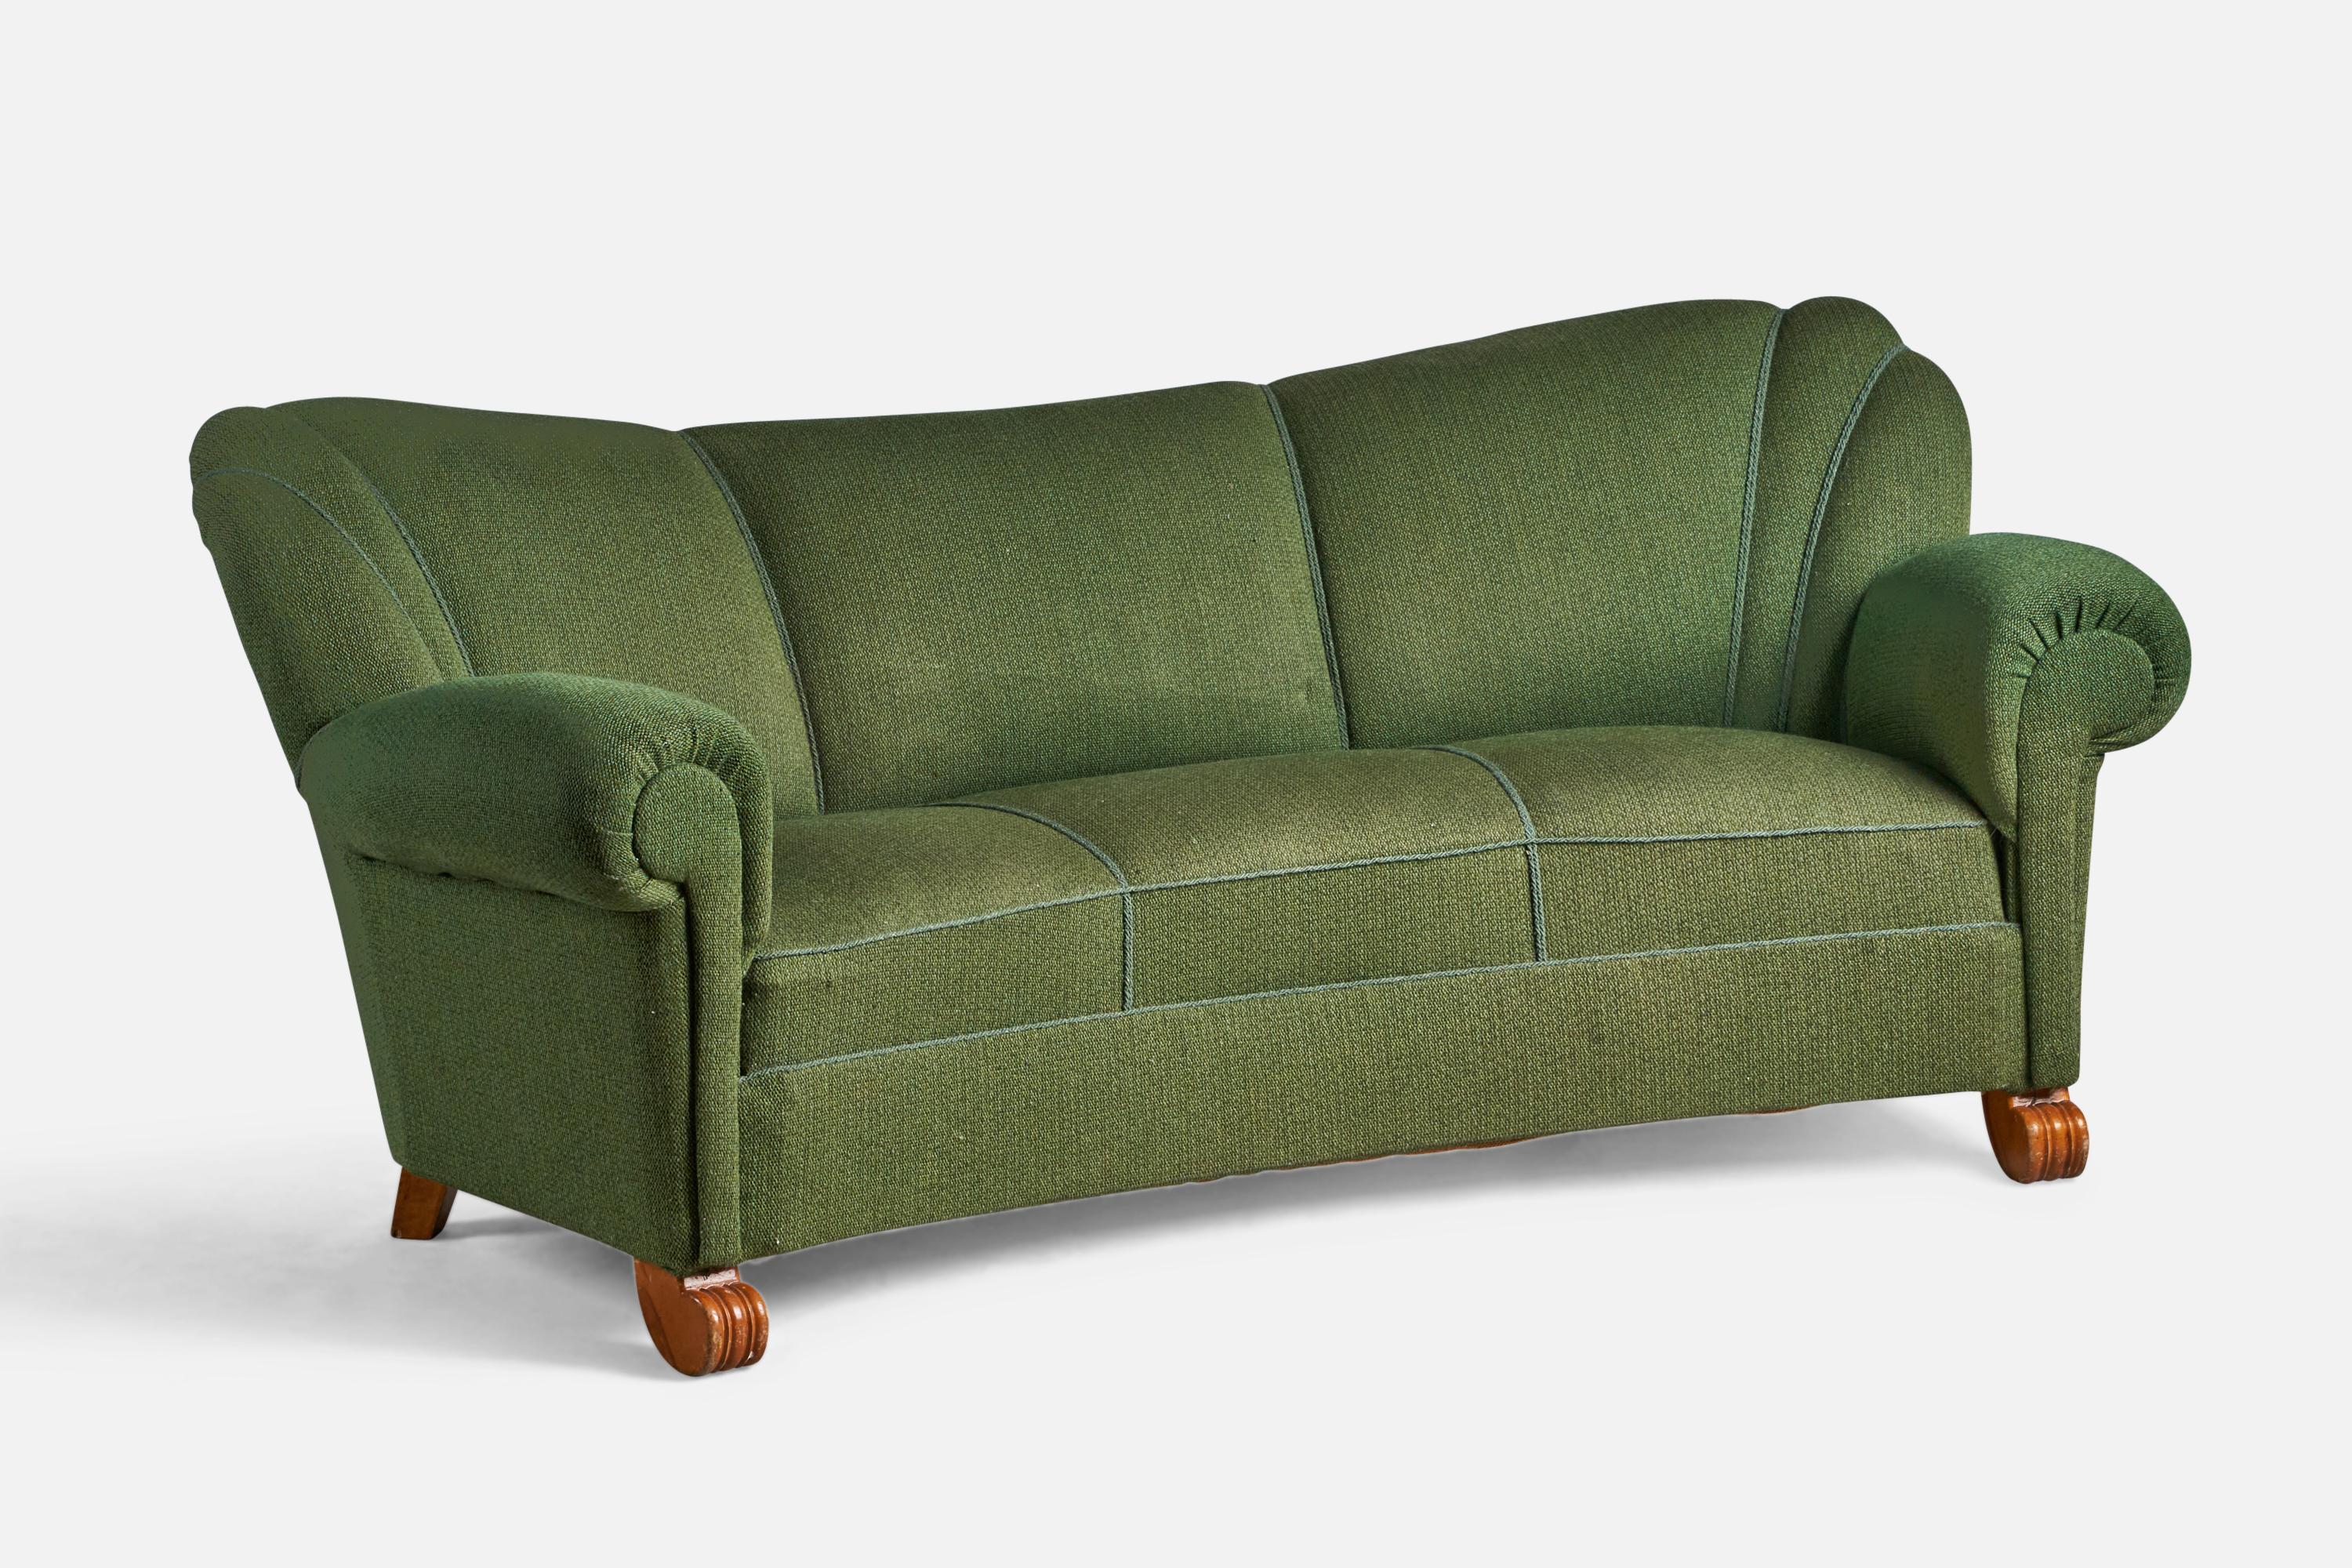 Swedish Tor Wolfenstein, Curved Sofa, Fabric, Wood, Sweden, 1940s For Sale